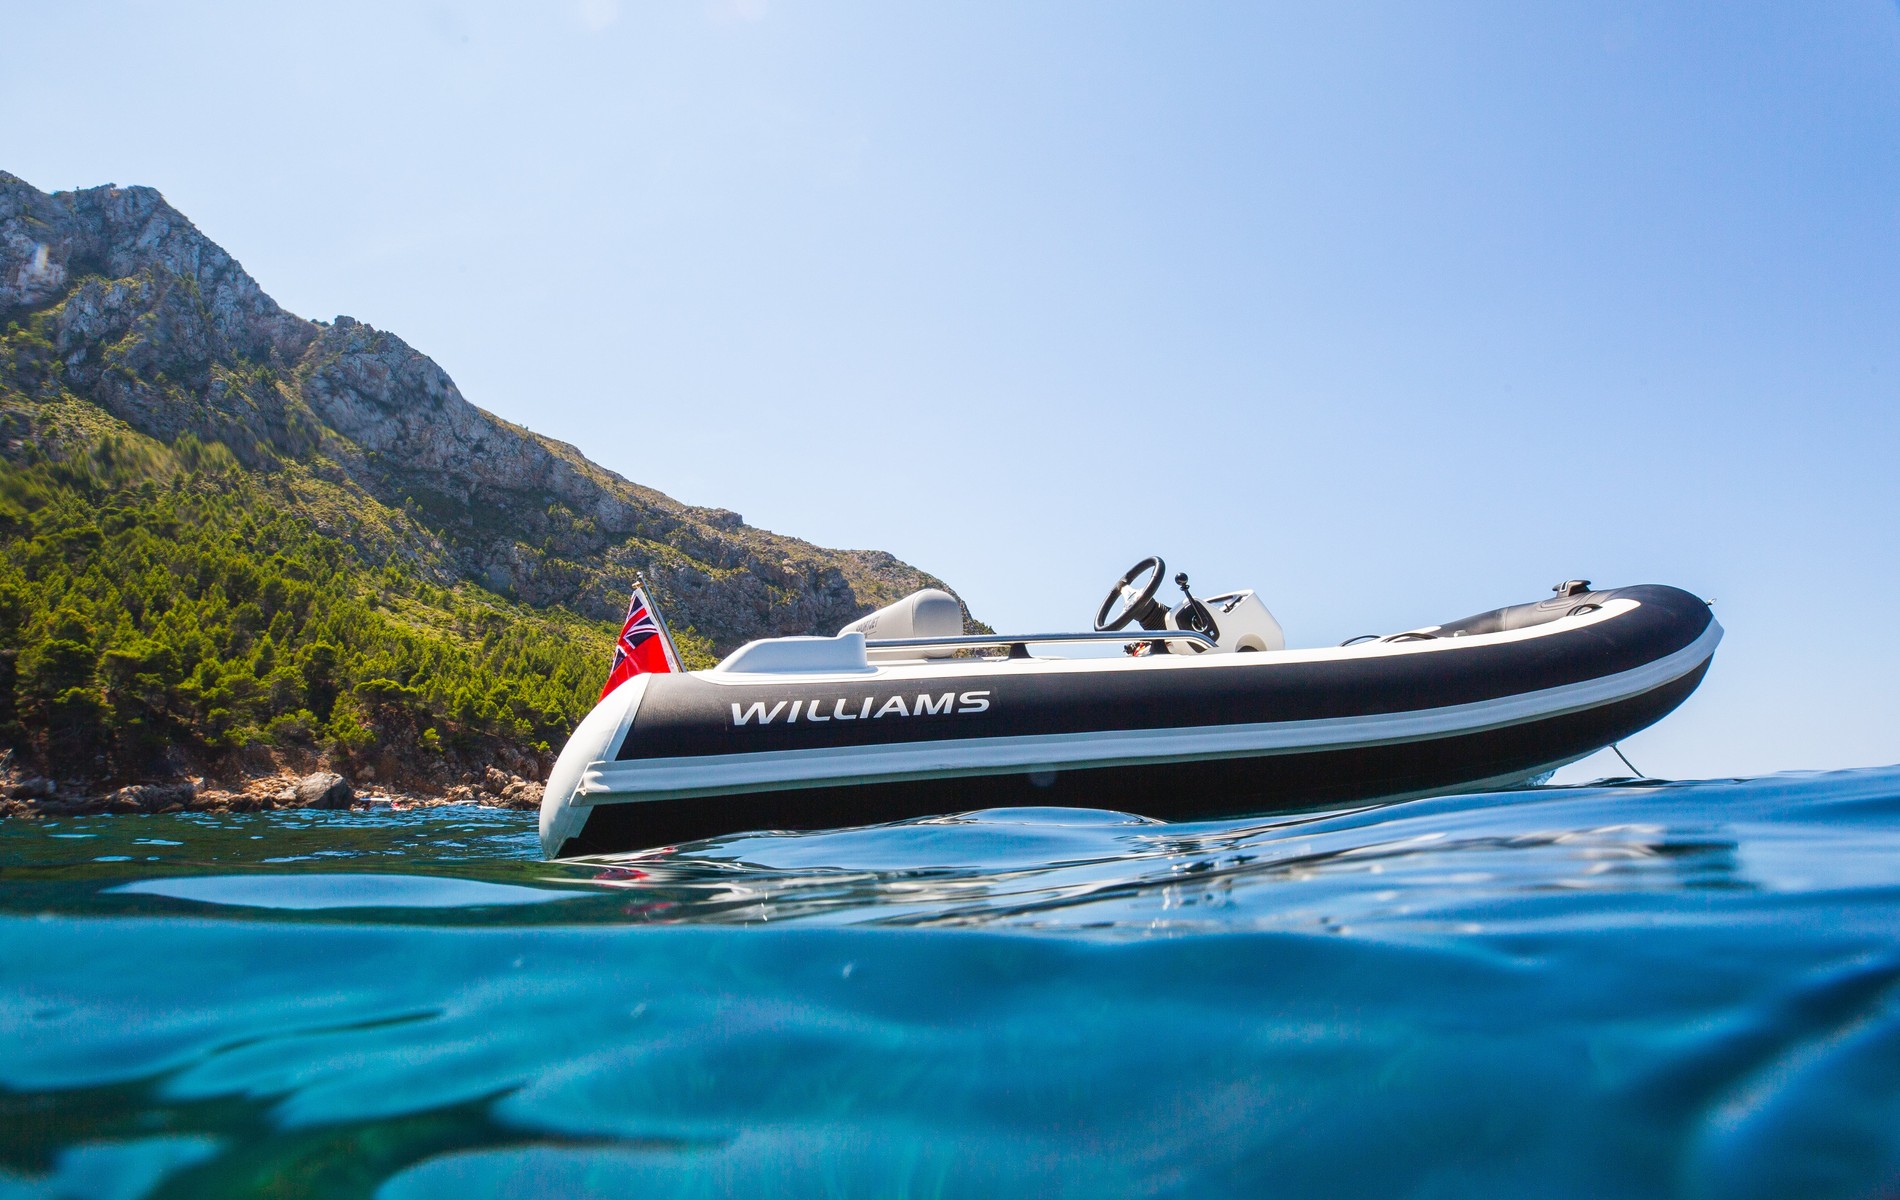 The 435 by Williams Jet Tenders